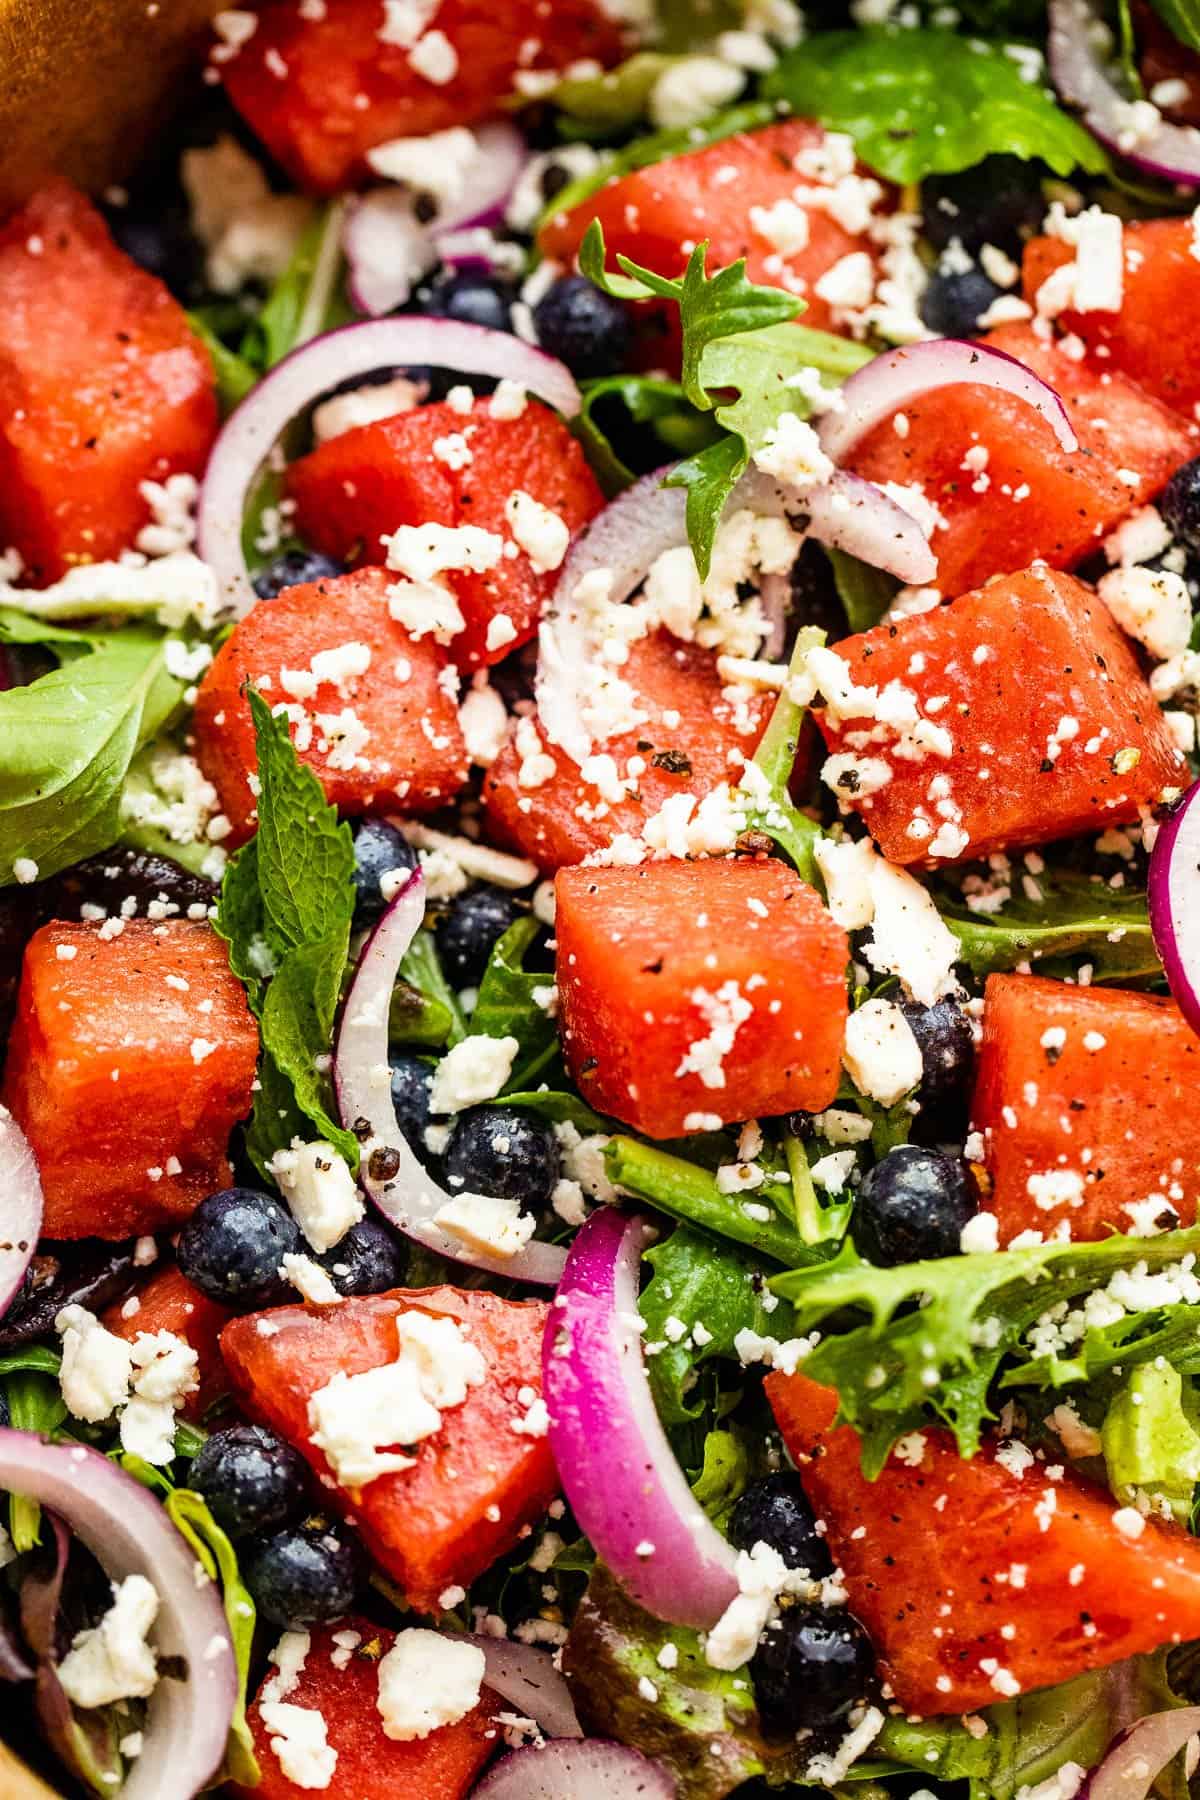 up close photo of cubed watermelon, blueberries, and sliced red onions atop a bed of torn up lettuce greens and topped with feta cheese crumbles